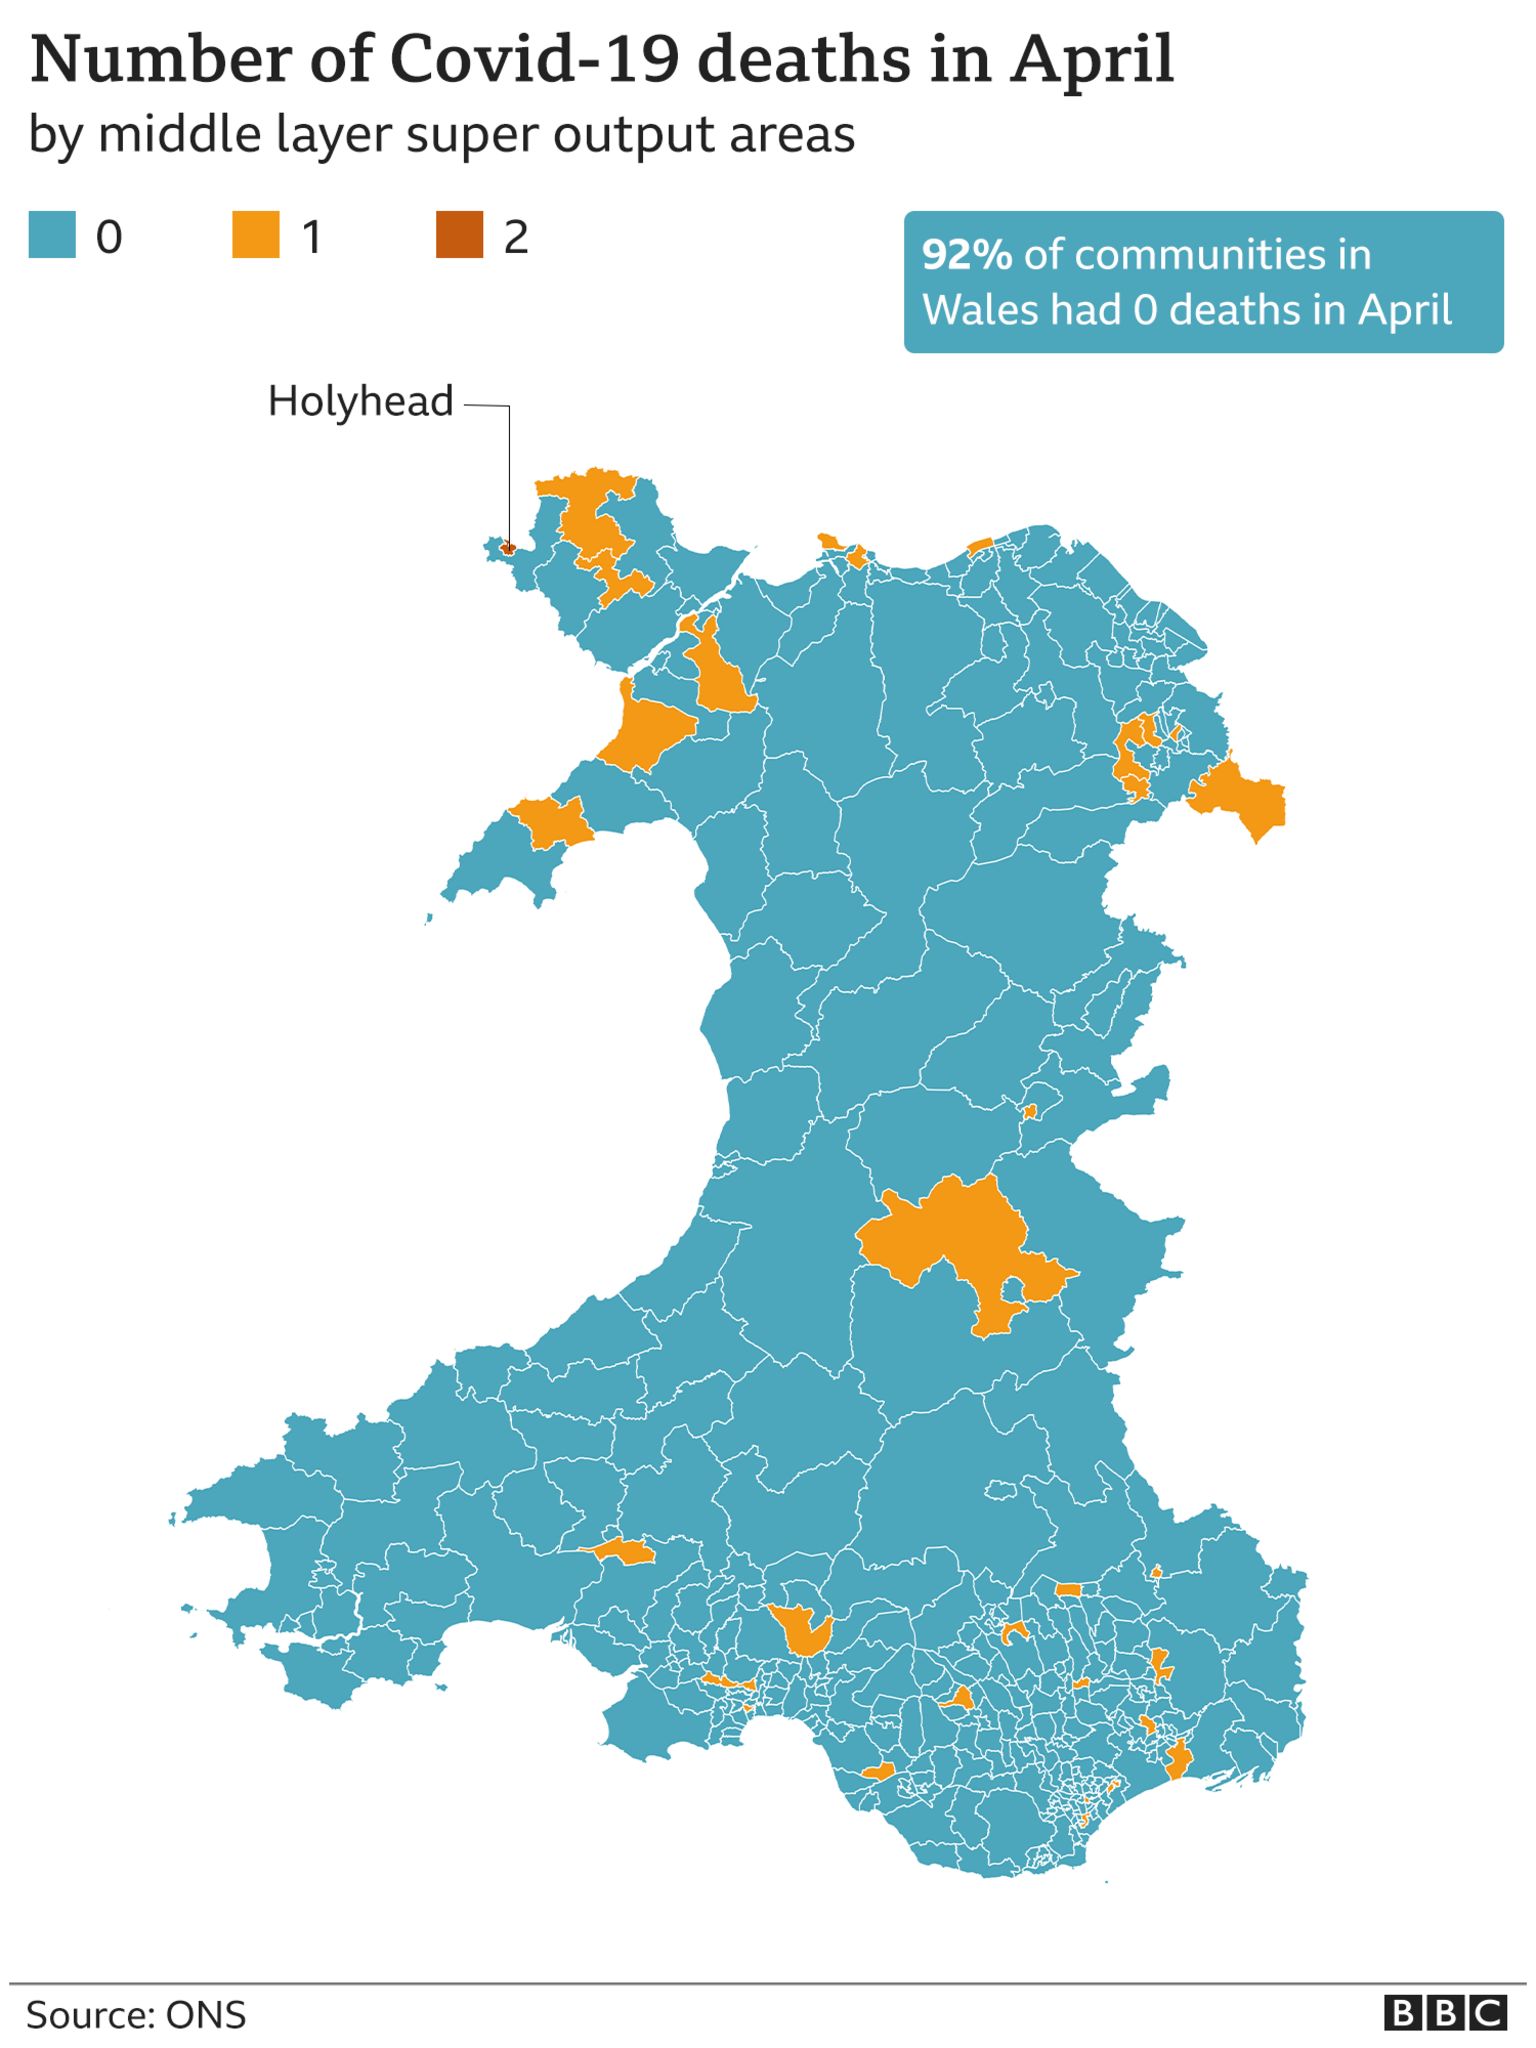 Deaths in Wales in April